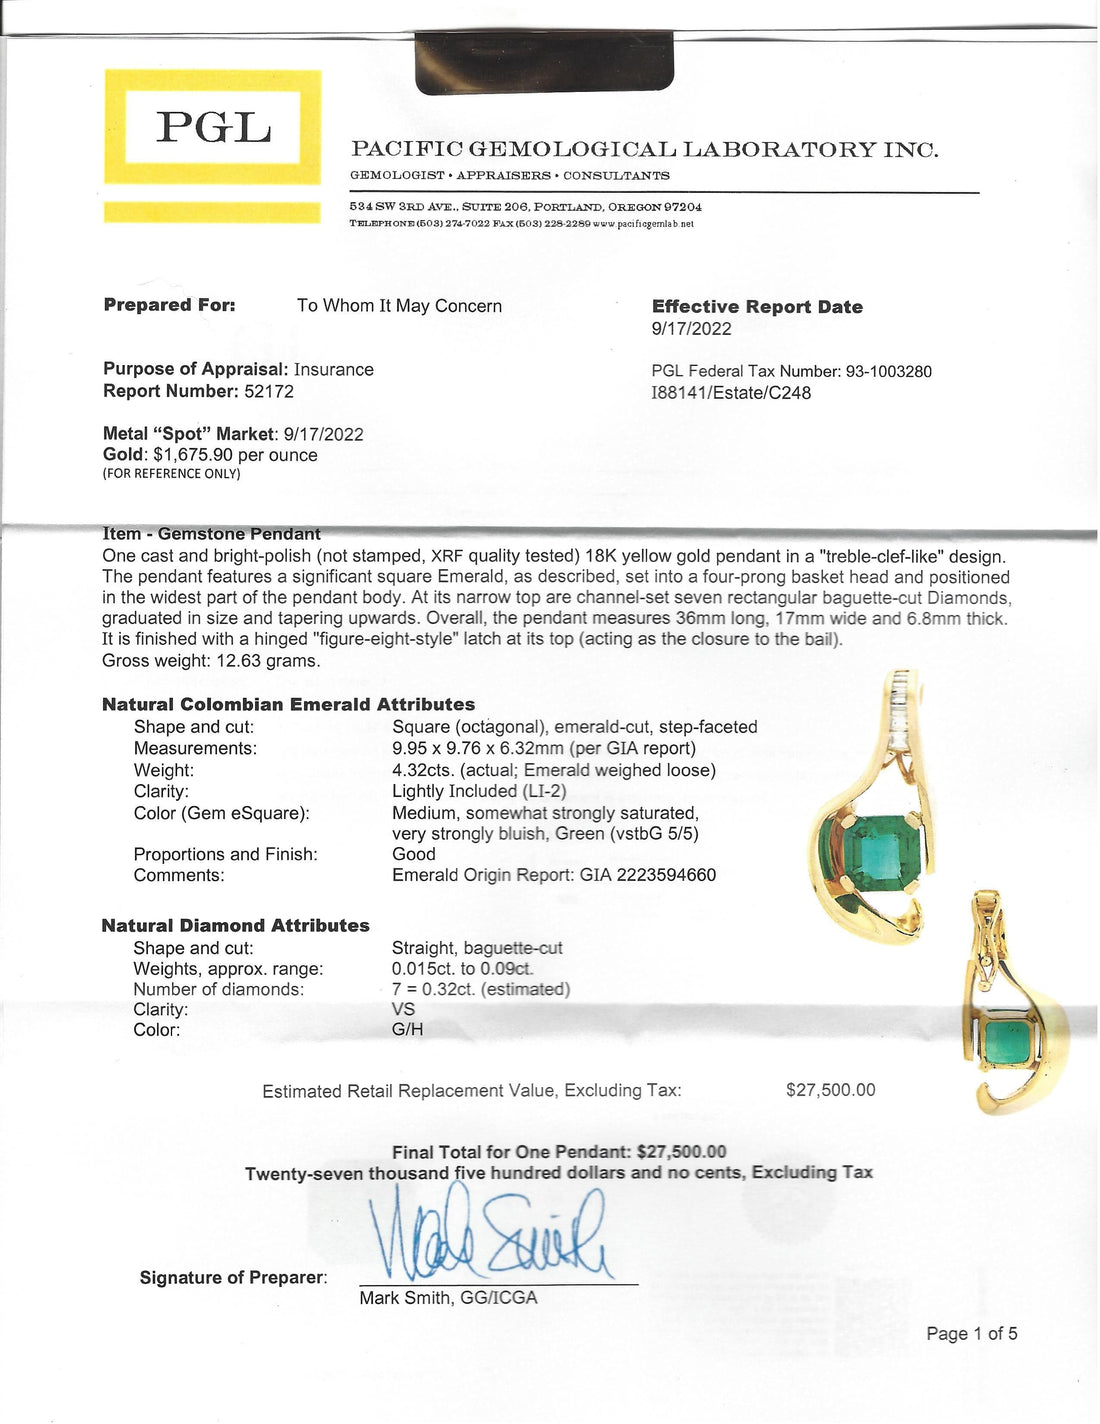 Baikalla Jewelry Gemstone Pendant Necklace Pendant Only 18k Yellow Gold Natural 4.23ct GIA Colombia Emerald Free From Necklace With Diamonds